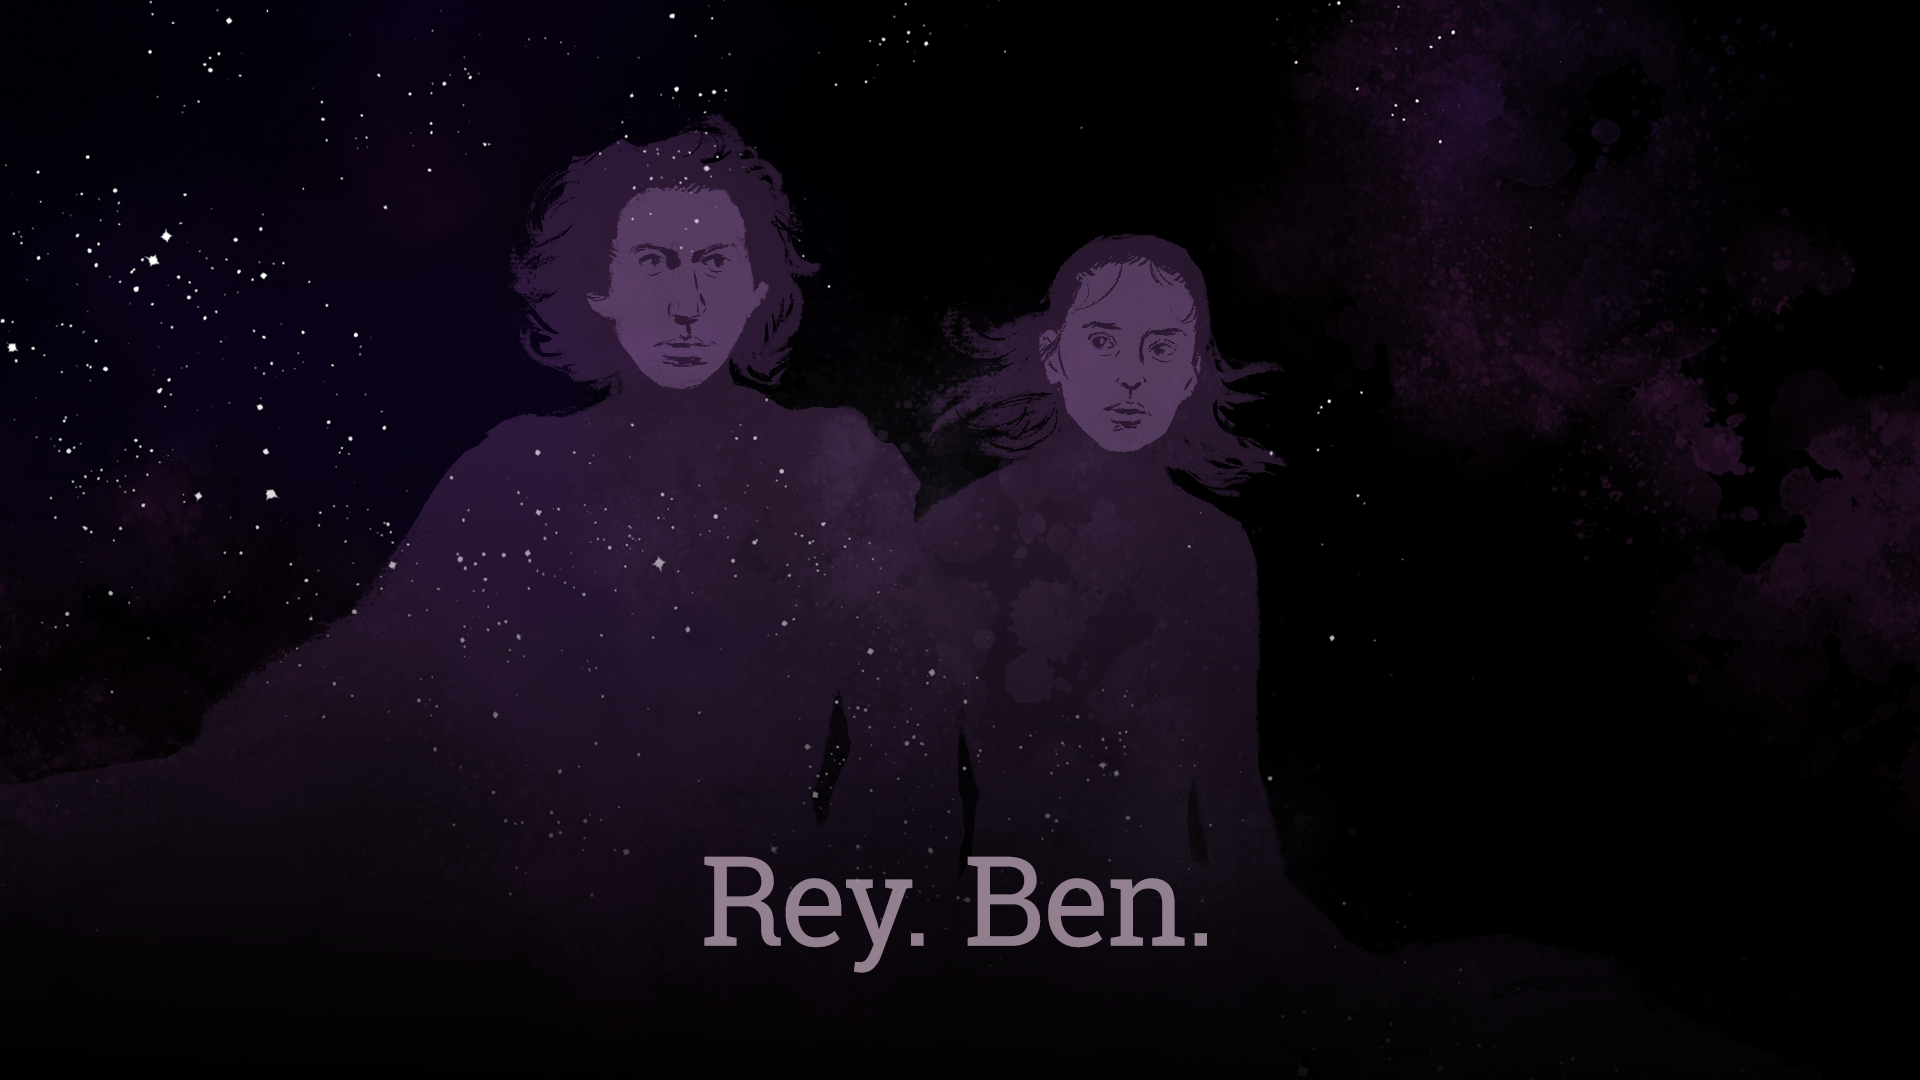 Rey. Ben. Silhouettes. Solemn-faced against the stars.